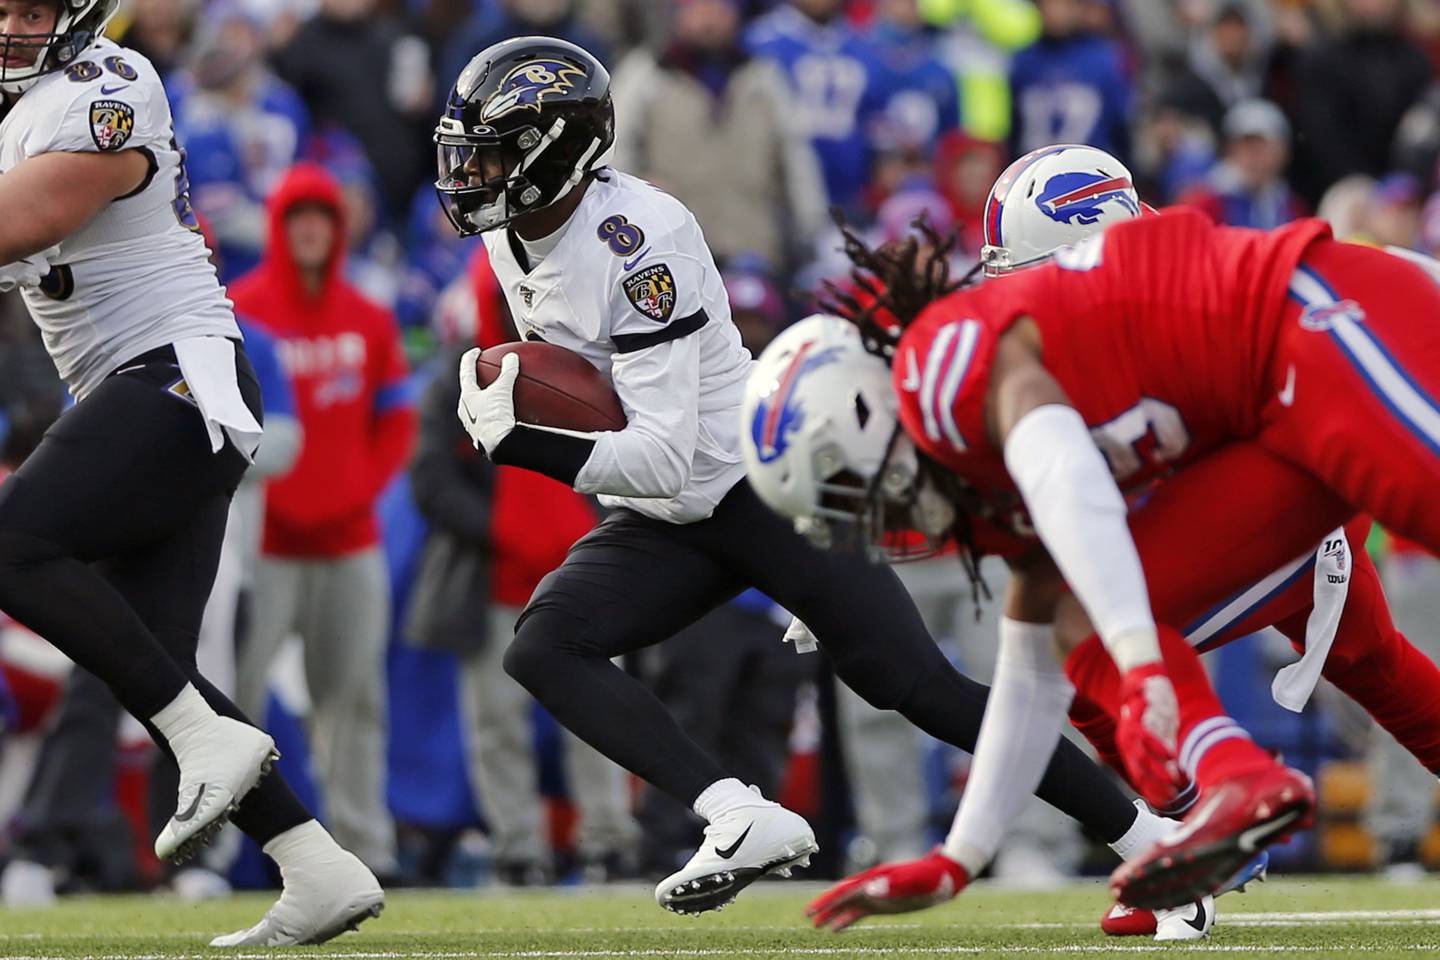 Ravens quarterback Lamar Jackson carries the ball during the first half against the Bills on Dec. 8, 2019, in Orchard Park, N.Y.